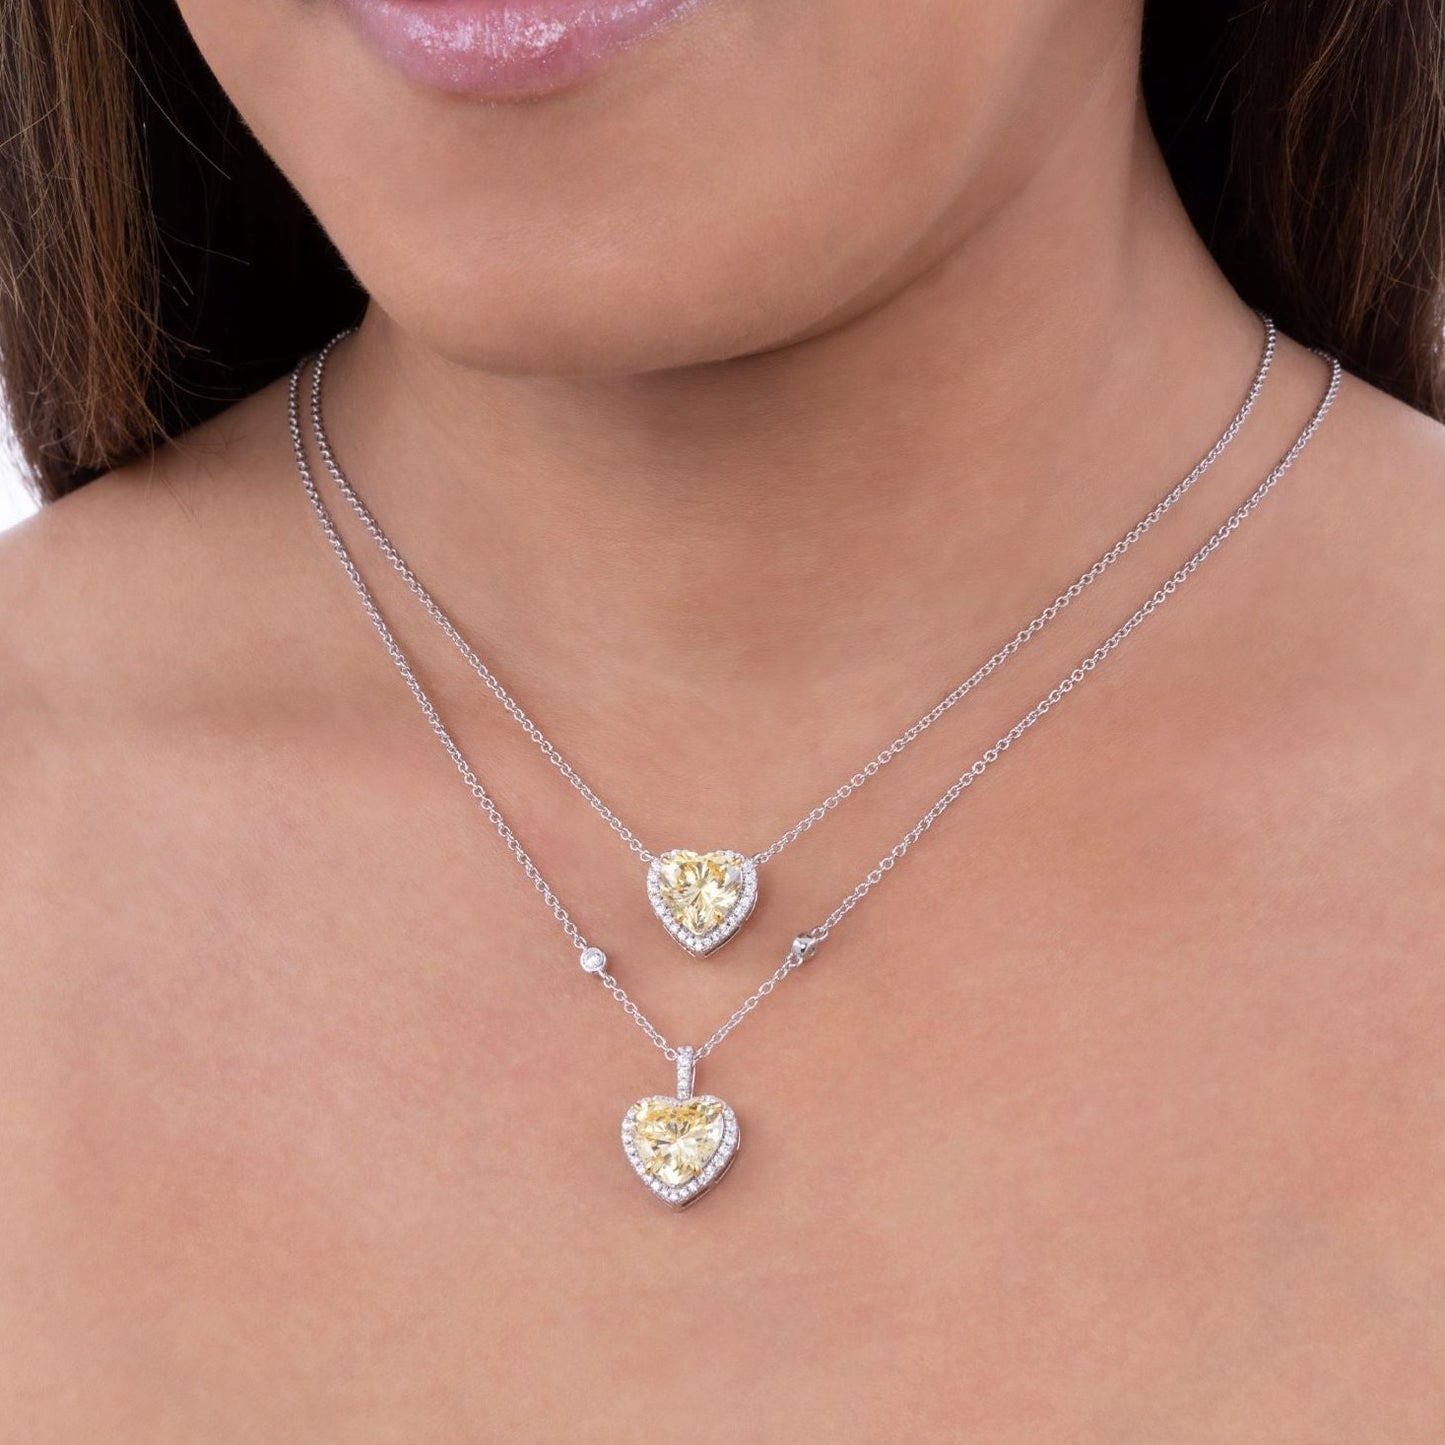 3 Carat Heart Shaped Necklace